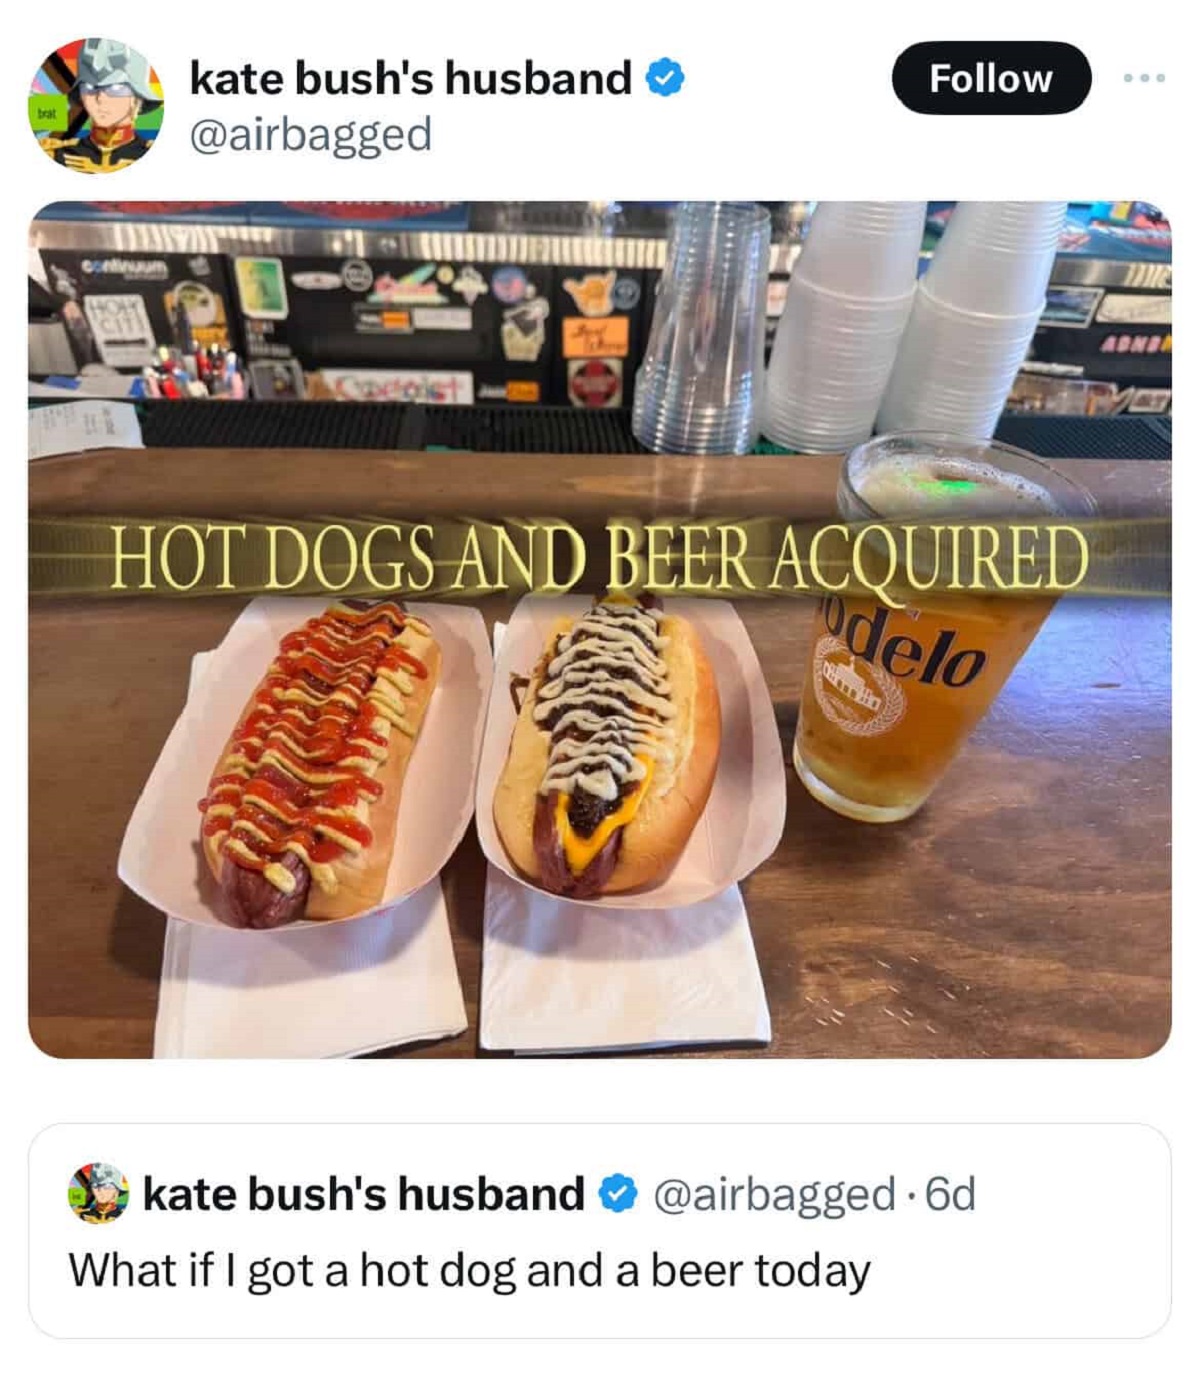 chili dog - brat kate bush's husband beinuum Hot Dogs And Beer Acquired kate bush's husband delo 6d What if I got a hot dog and a beer today